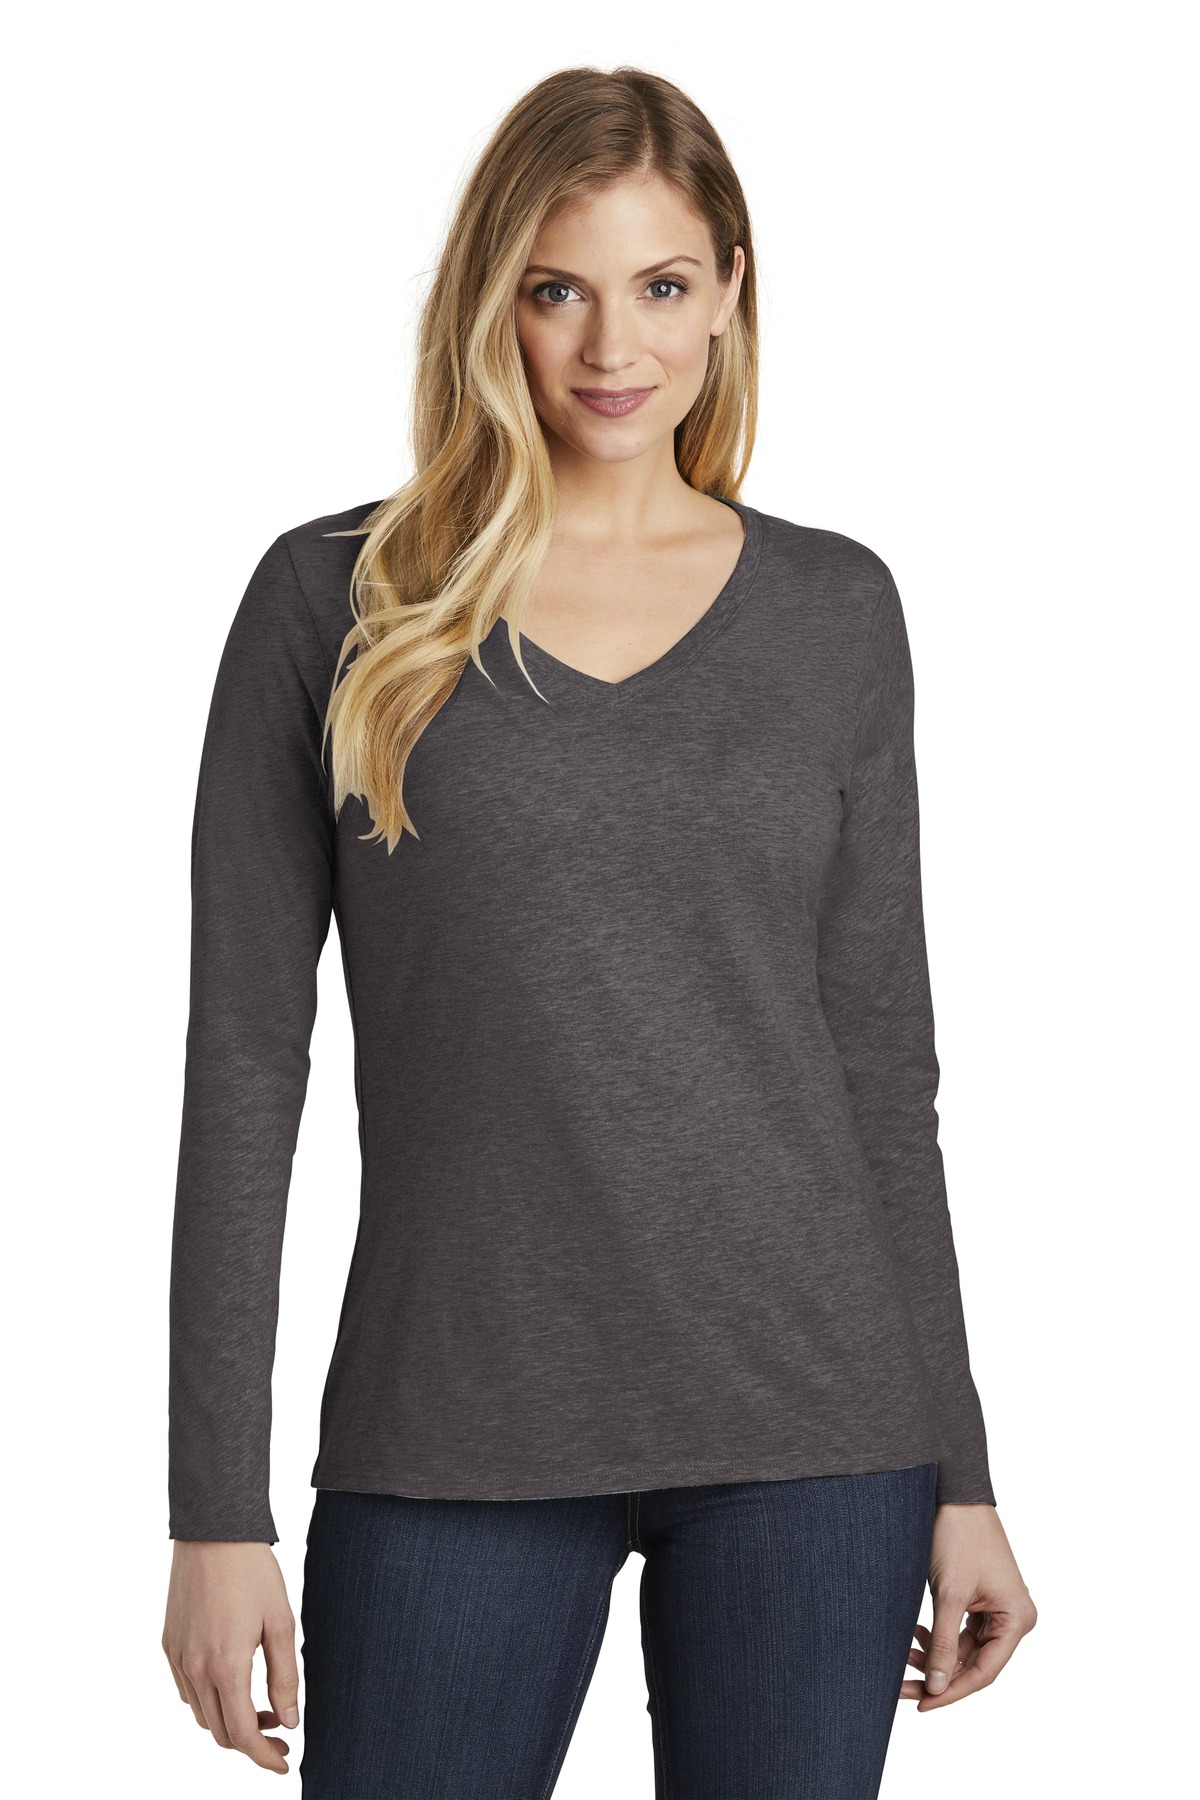 District Women''s Very Important Tee Long Sleeve V-Neck. DT6201